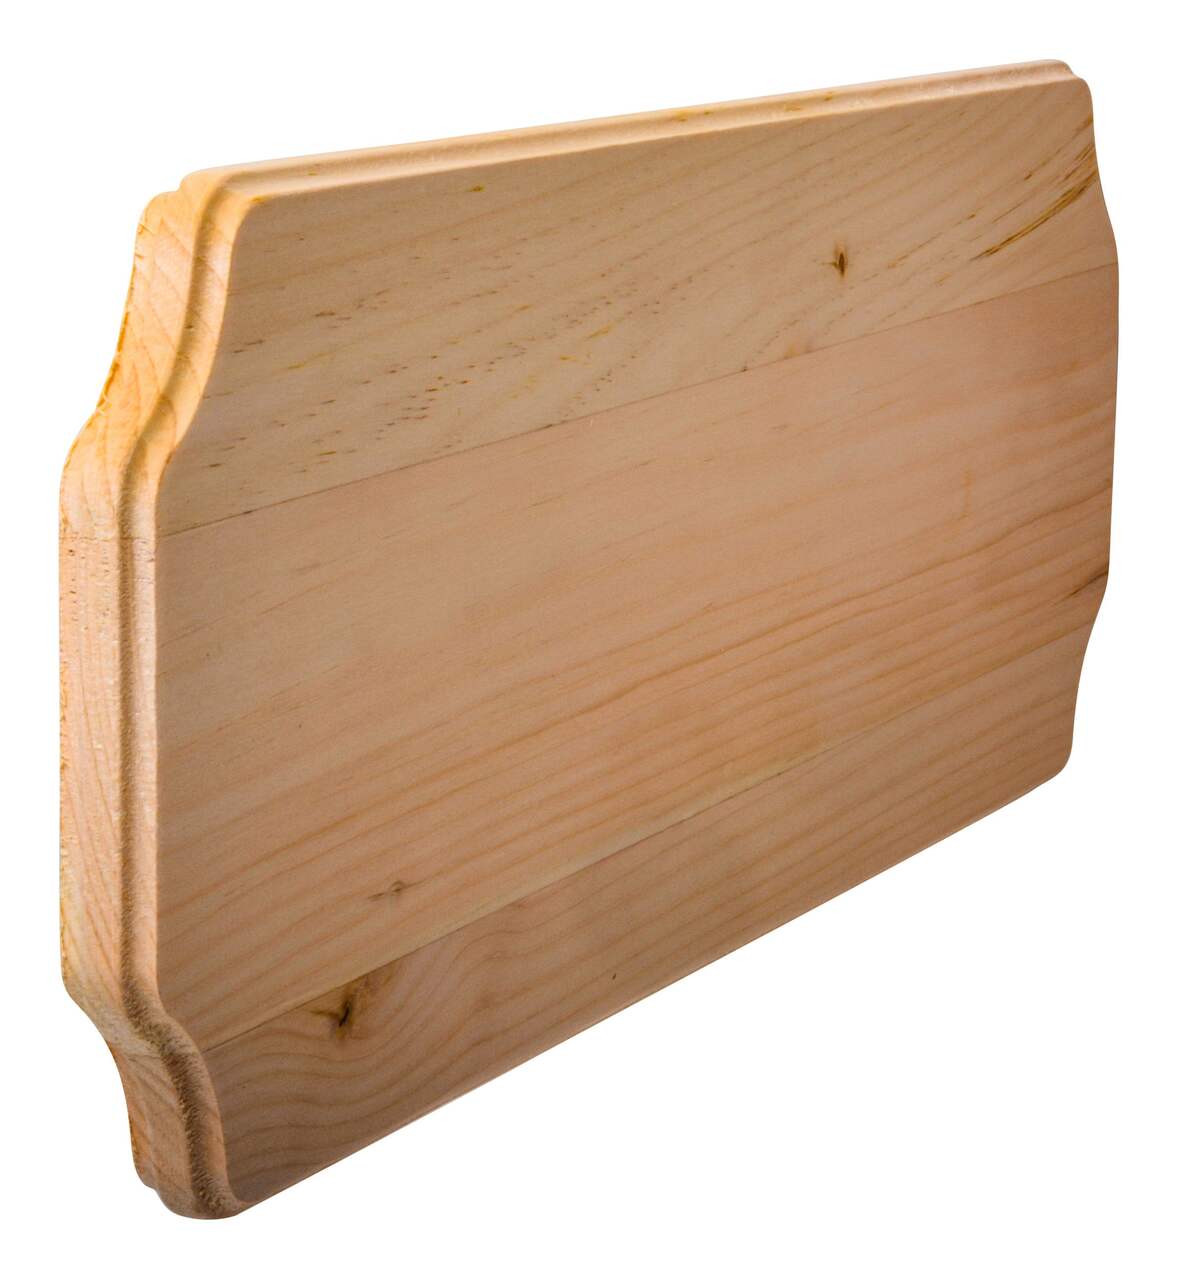 https://media-www.canadiantire.ca/product/fixing/hardware/curb-appeal/0465384/wooden-house-plaque-347981f4-ac9e-4e45-8849-deac529a08d1-jpgrendition.jpg?imdensity=1&imwidth=1244&impolicy=mZoom